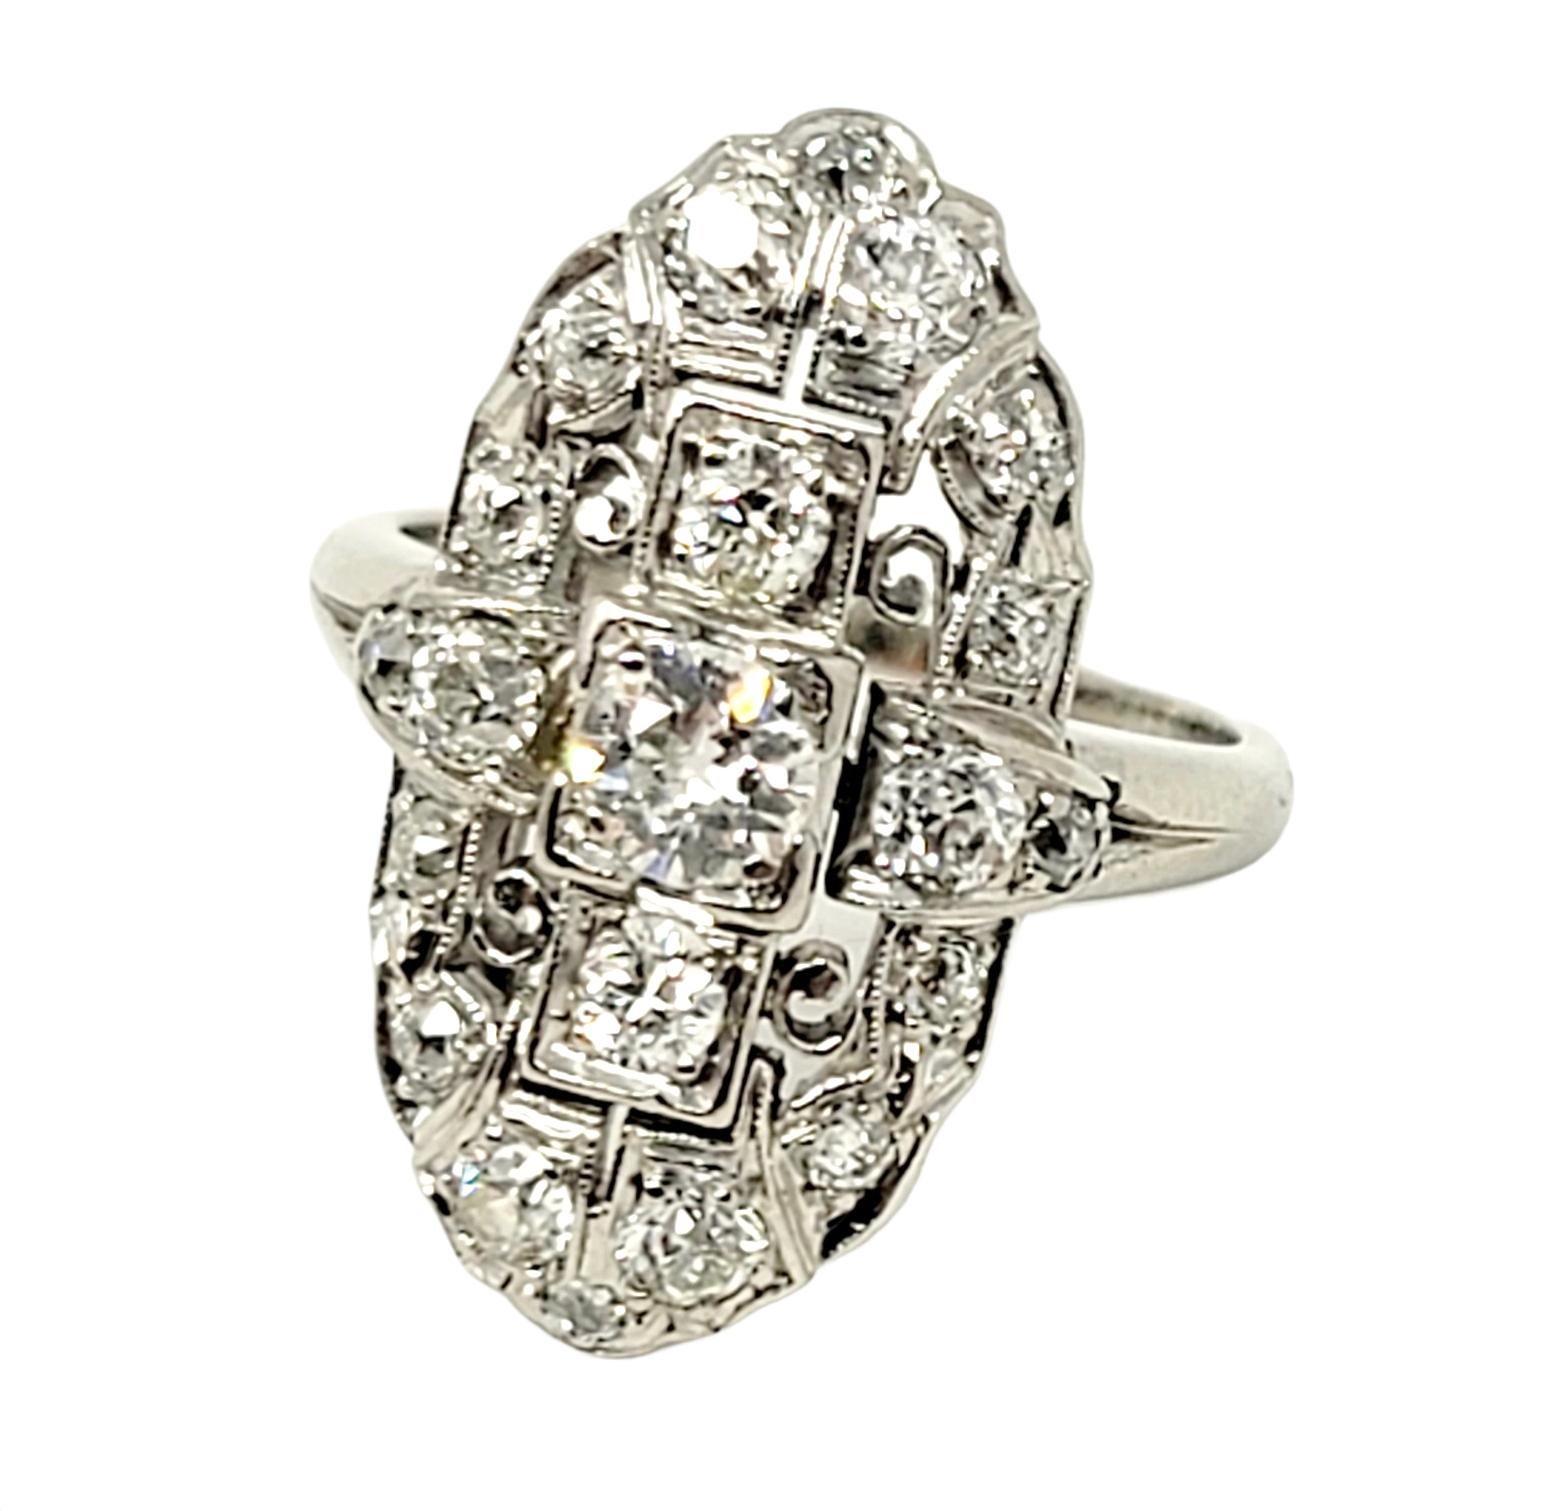 Ring size: 5.75

Incredible vintage diamond ring is the essence of old world glamour. The unique shape and impeccable detail work make this a truly special piece. The ring features a single sparkling round Old European cut diamond prong set in a